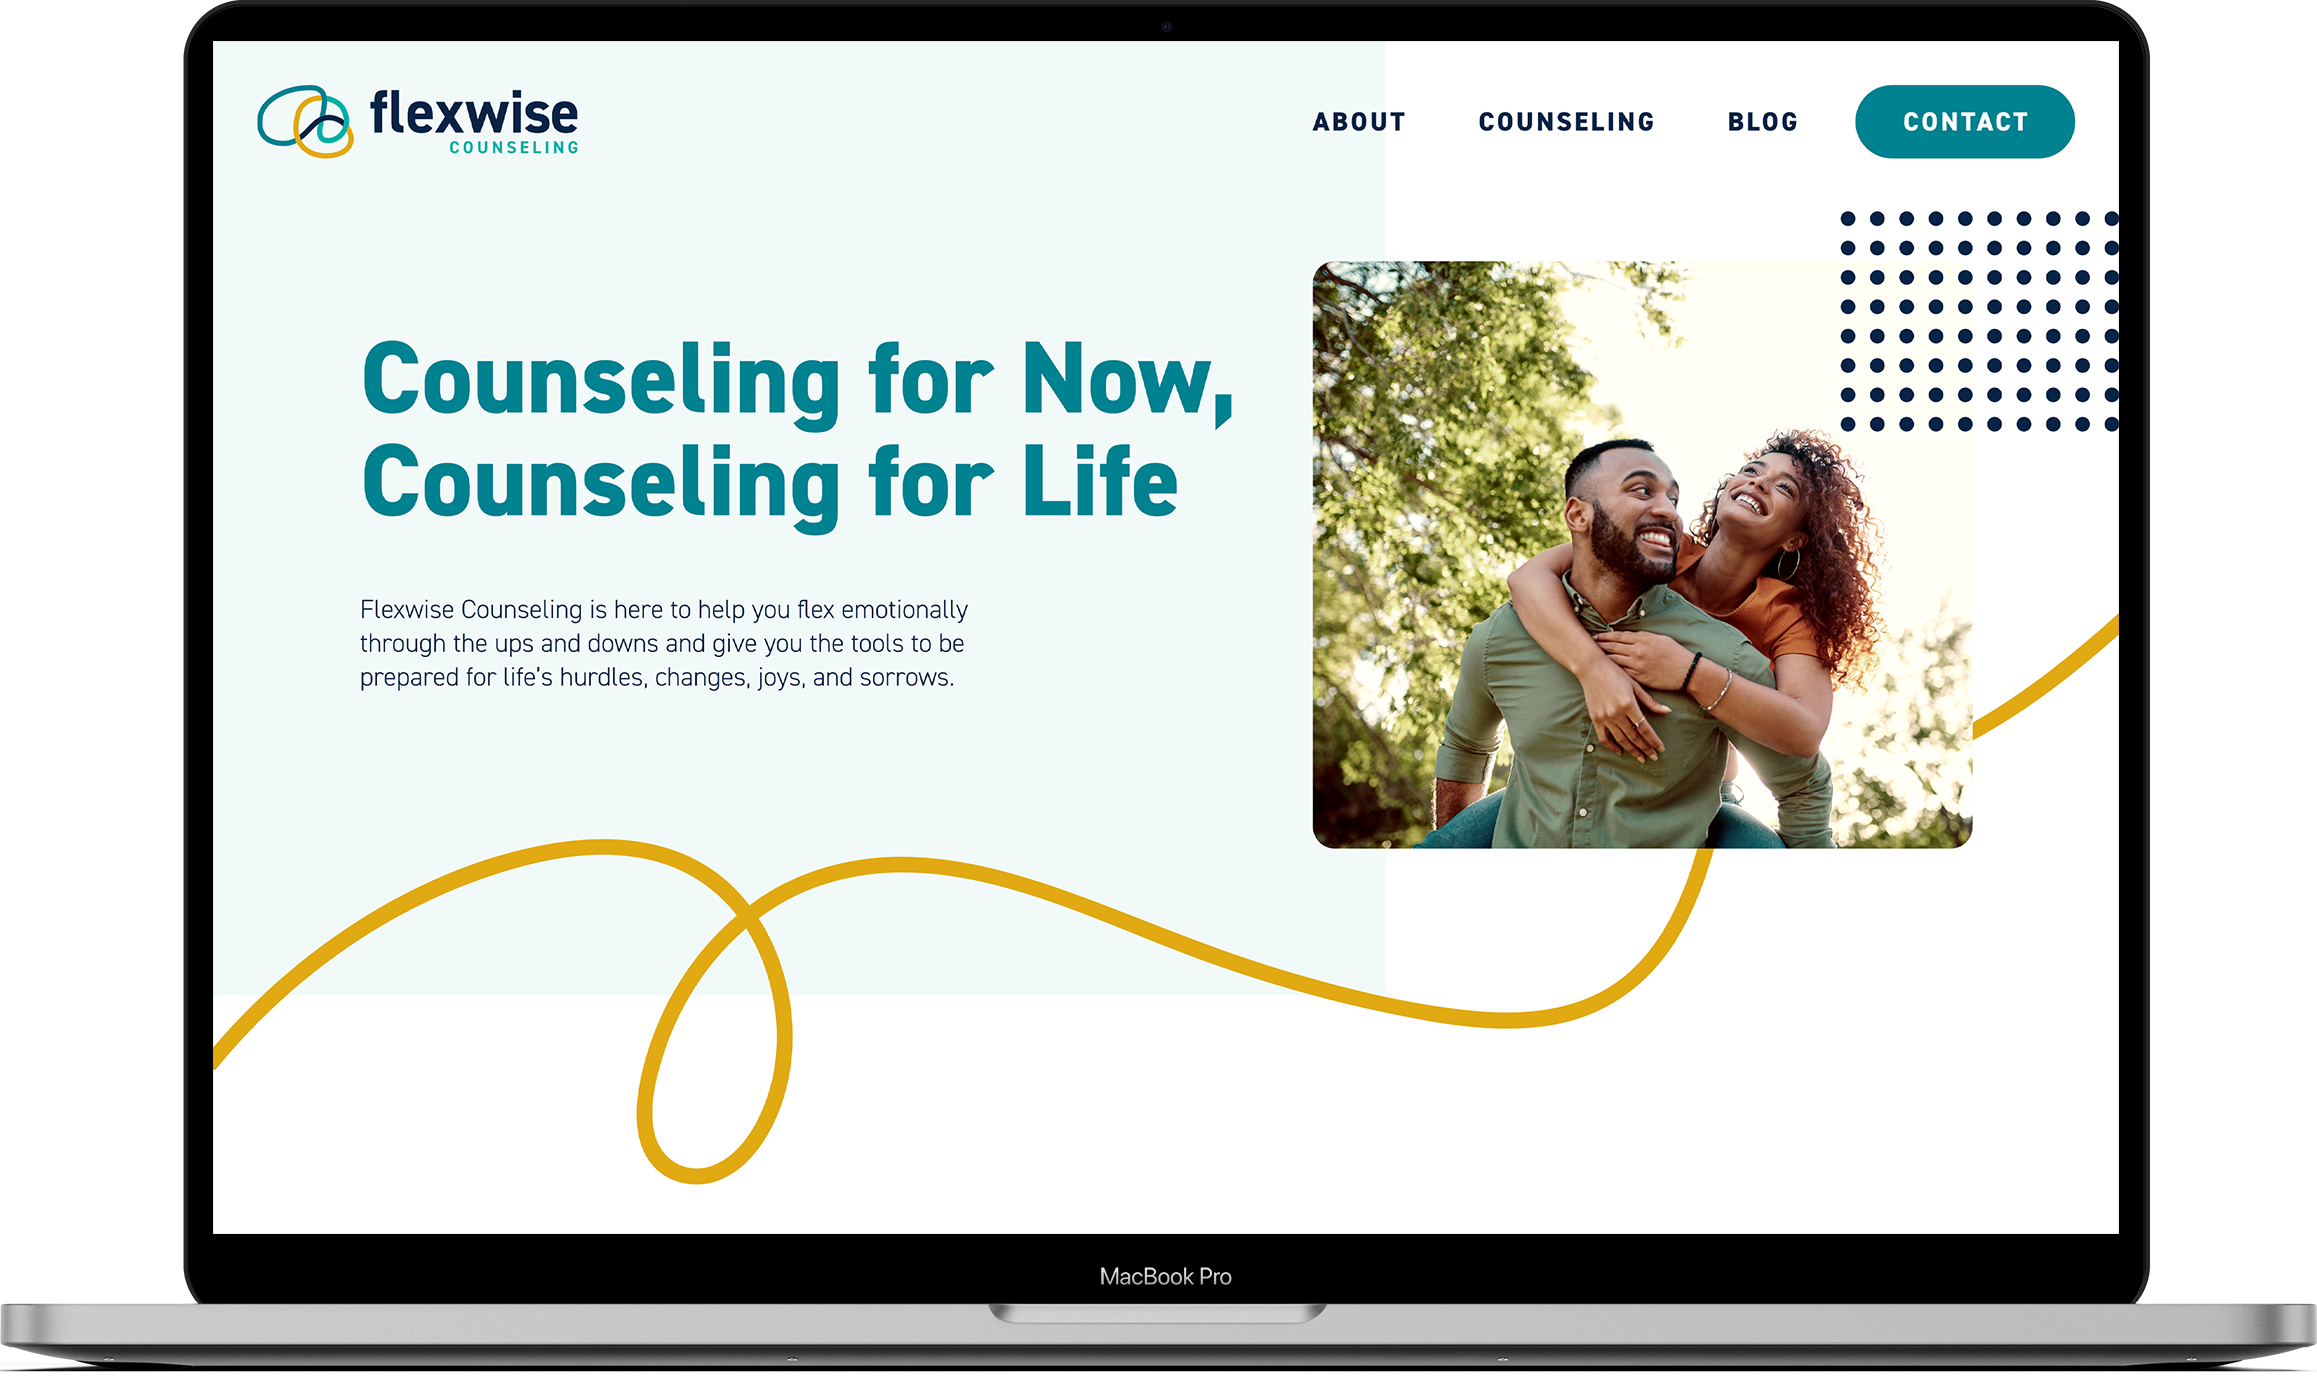 MacBook Pro Mockup showing the top of the homepage of the Flexwise Counseling website